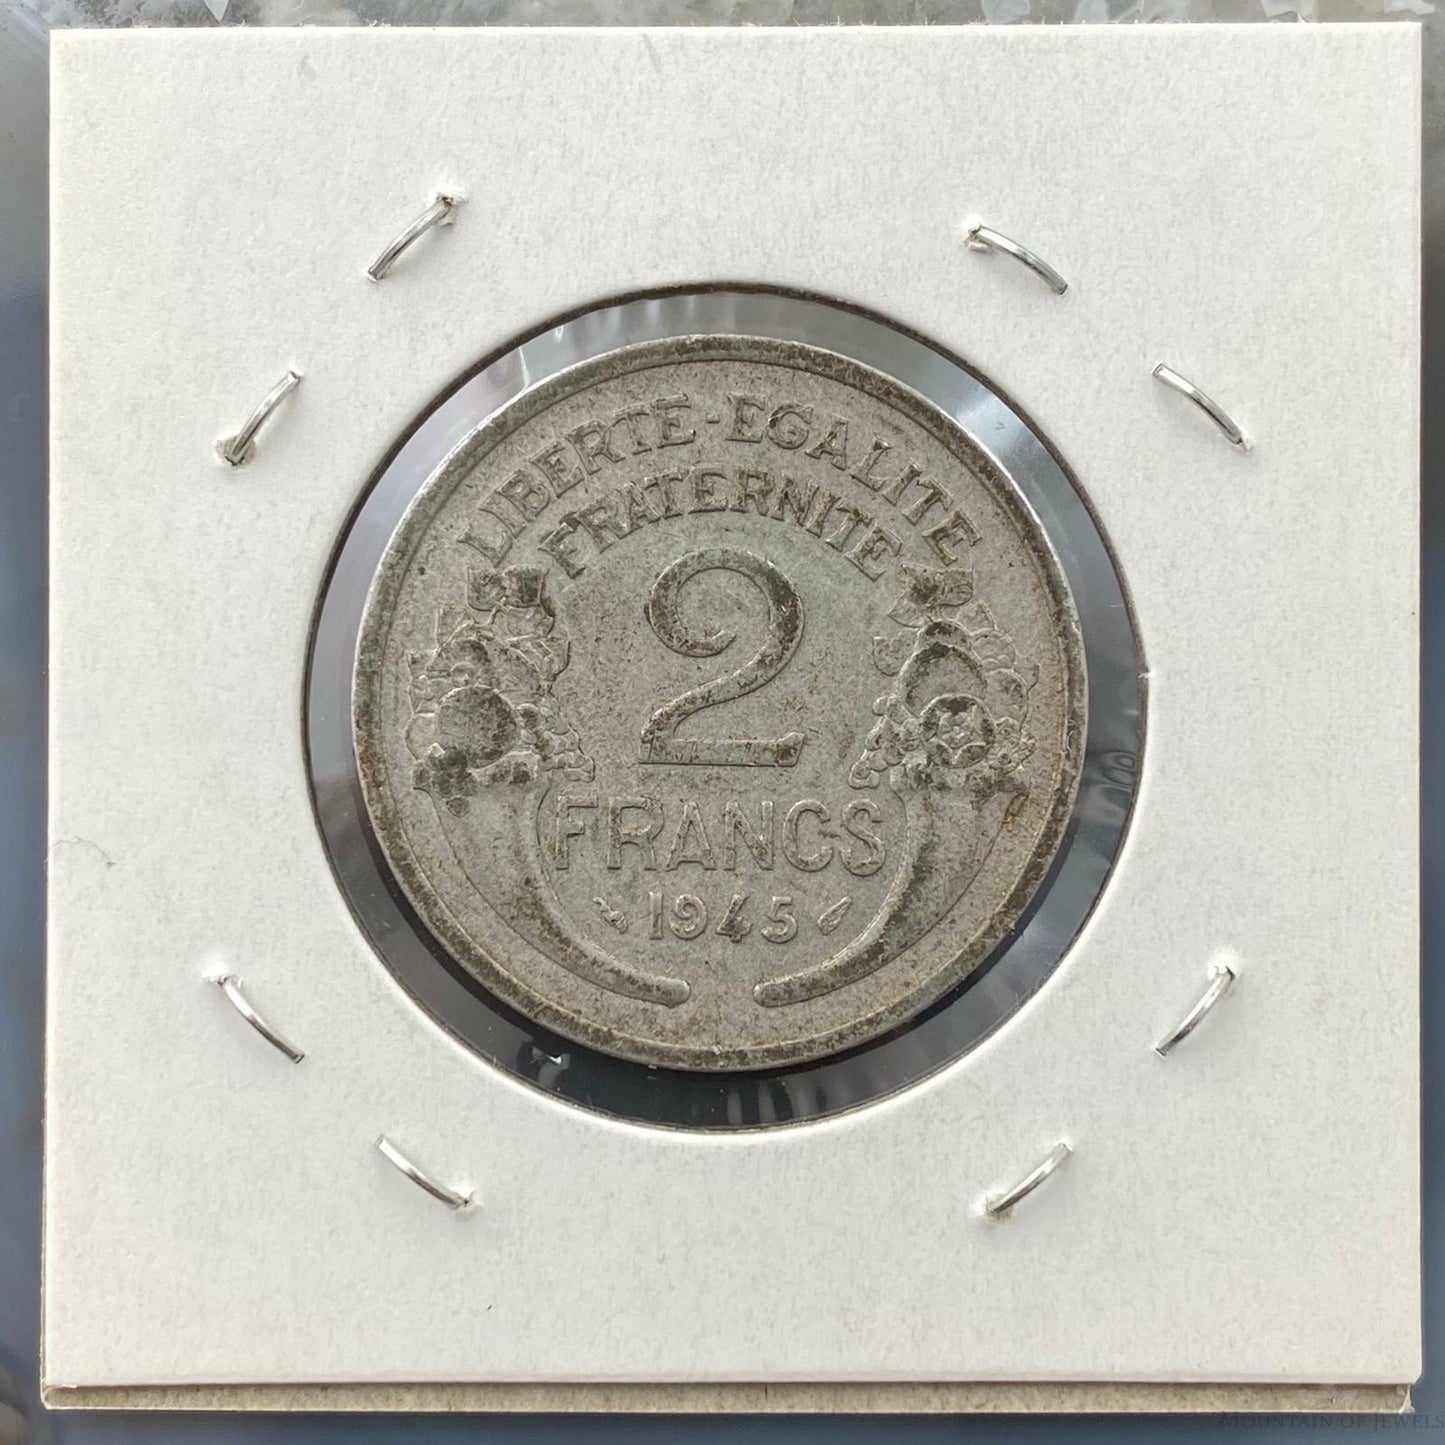 1945 France 2 Francs KM886a.1 WWII Liberty Head Collectible Coin #73120-6